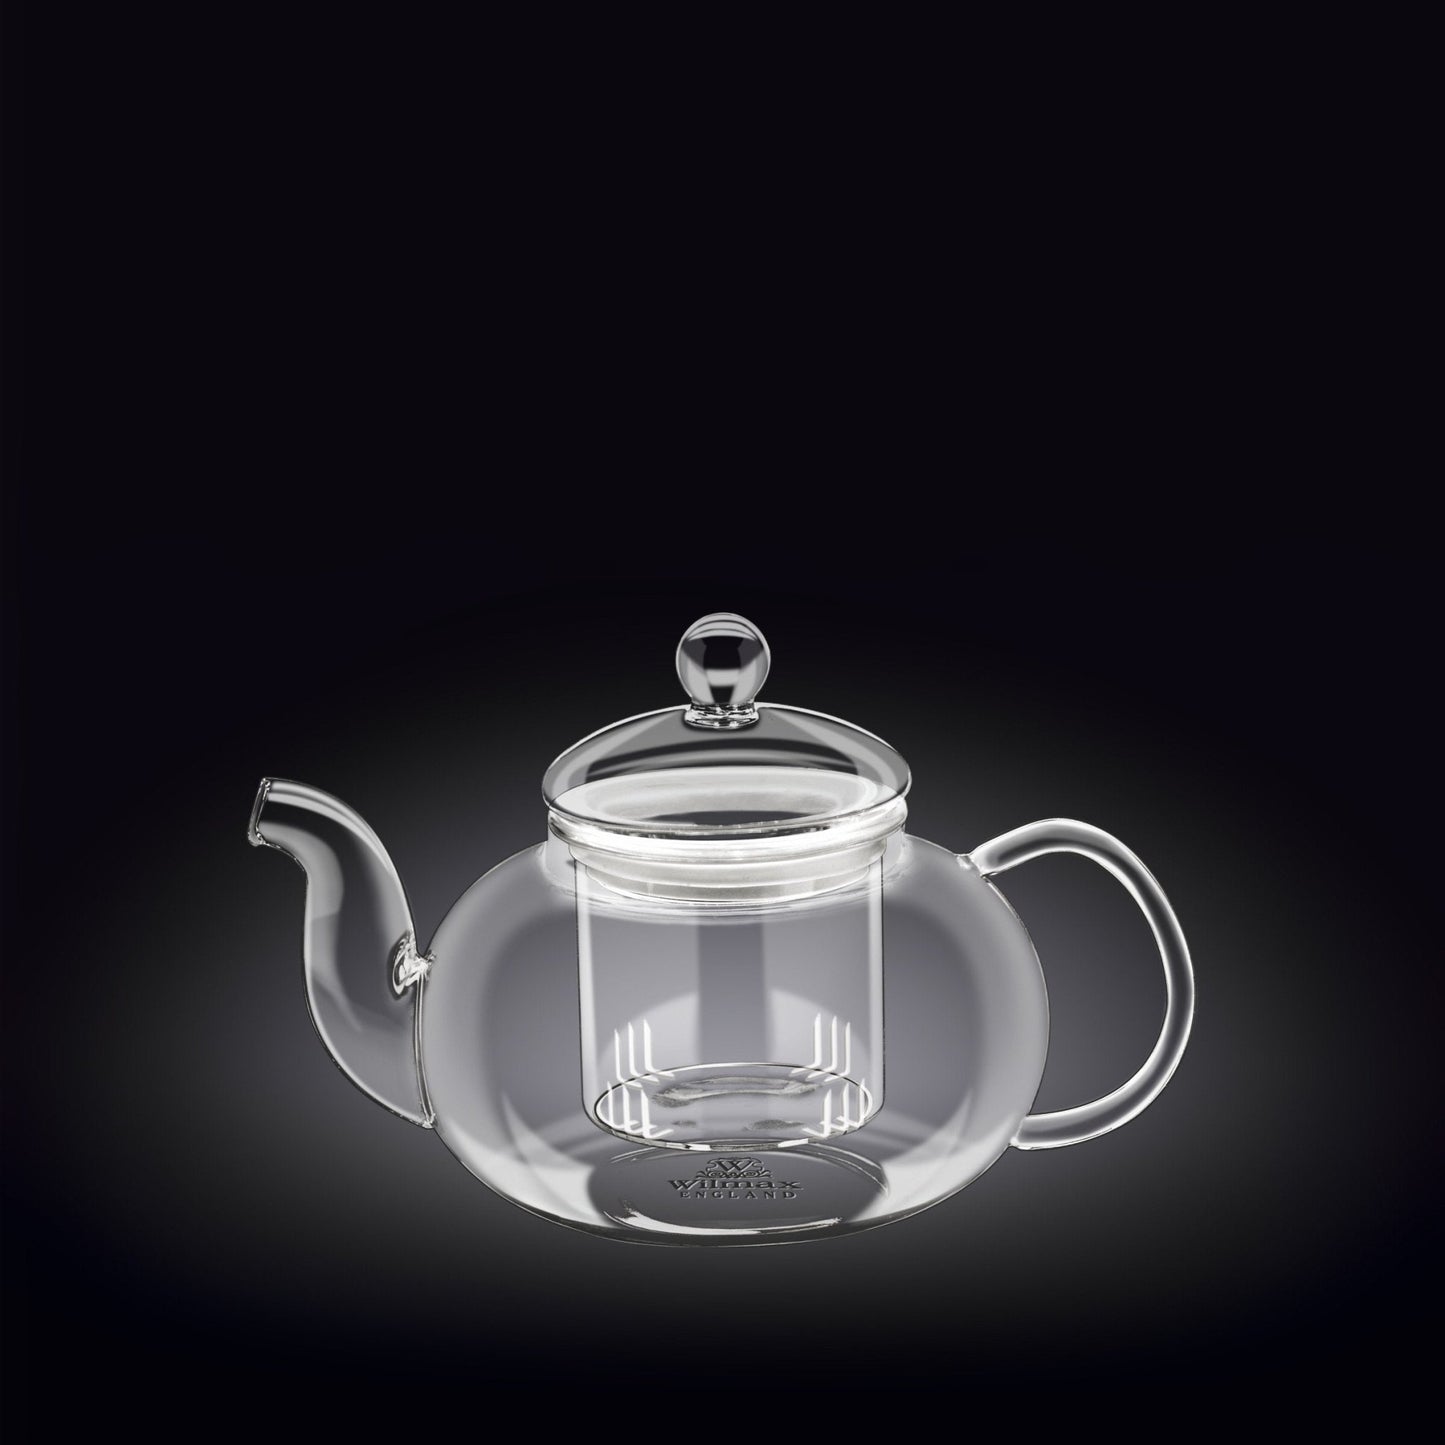 Thermo Glass Tea Pot 20 Fl Oz | High temperature and shock resistant by Wilmax Porcelain Leaves of Leisure